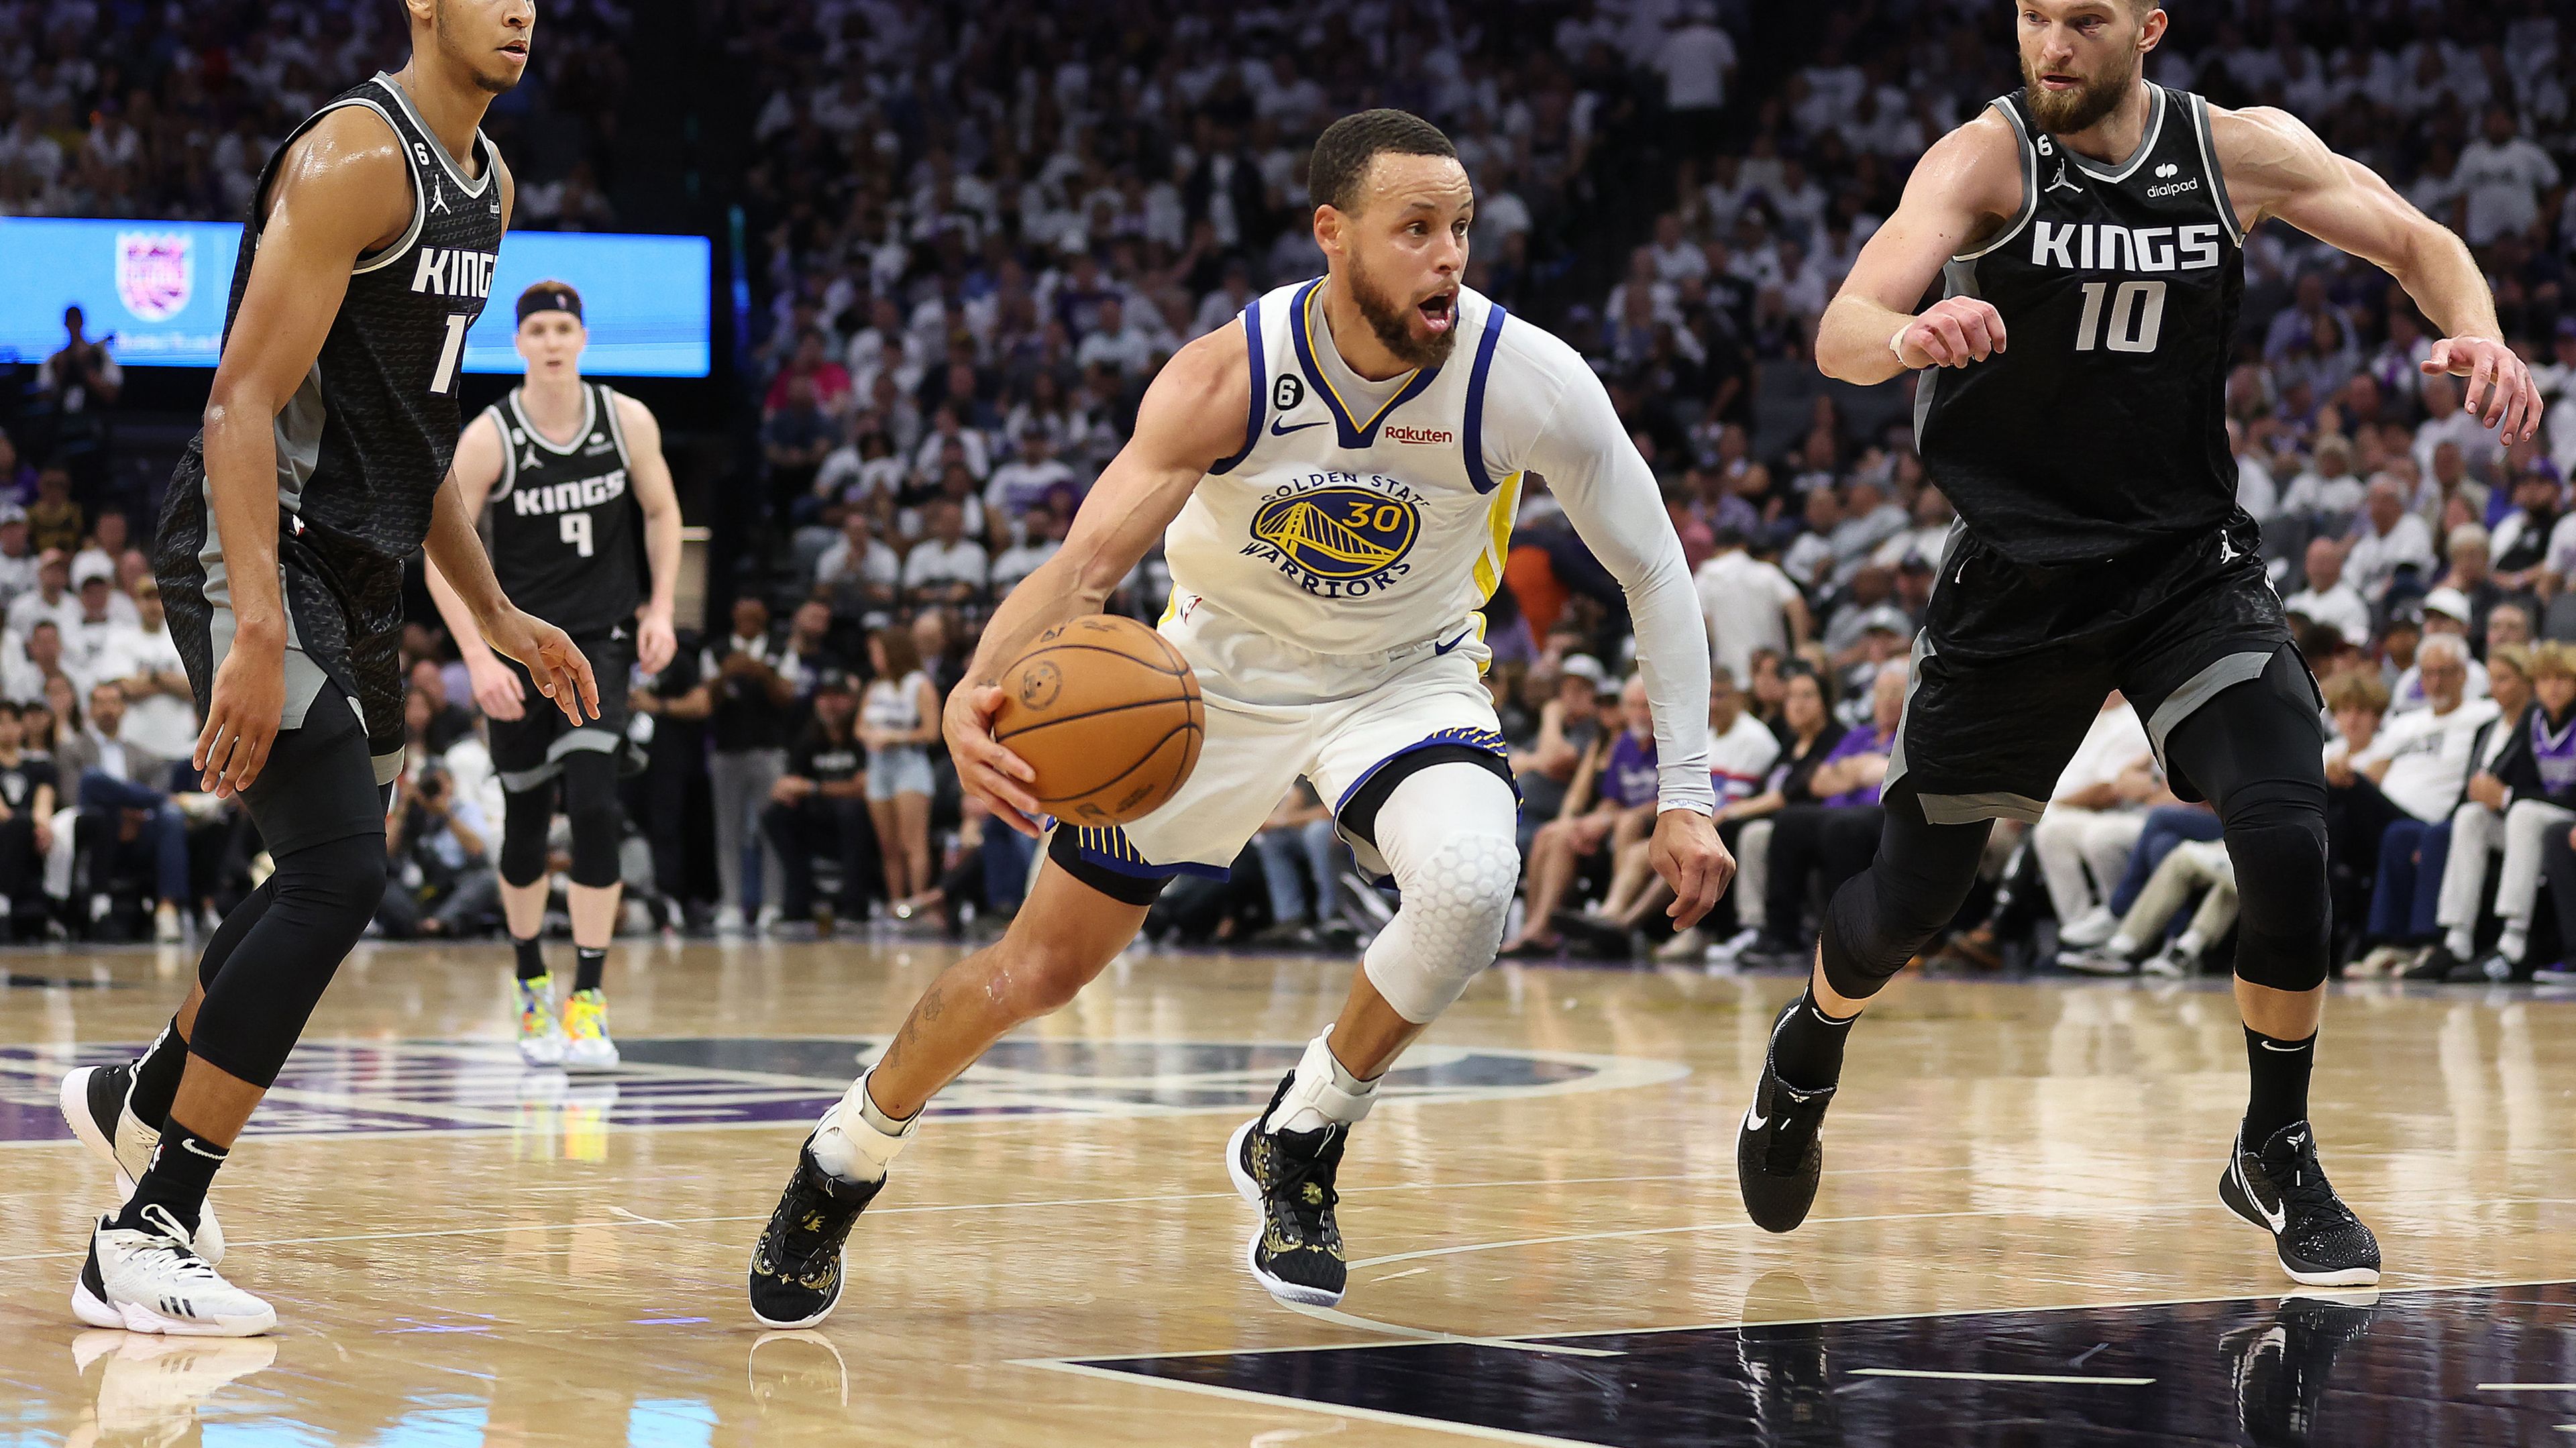 Stephen Curry of the Golden State Warriors dribbles against the Sacramento Kings.